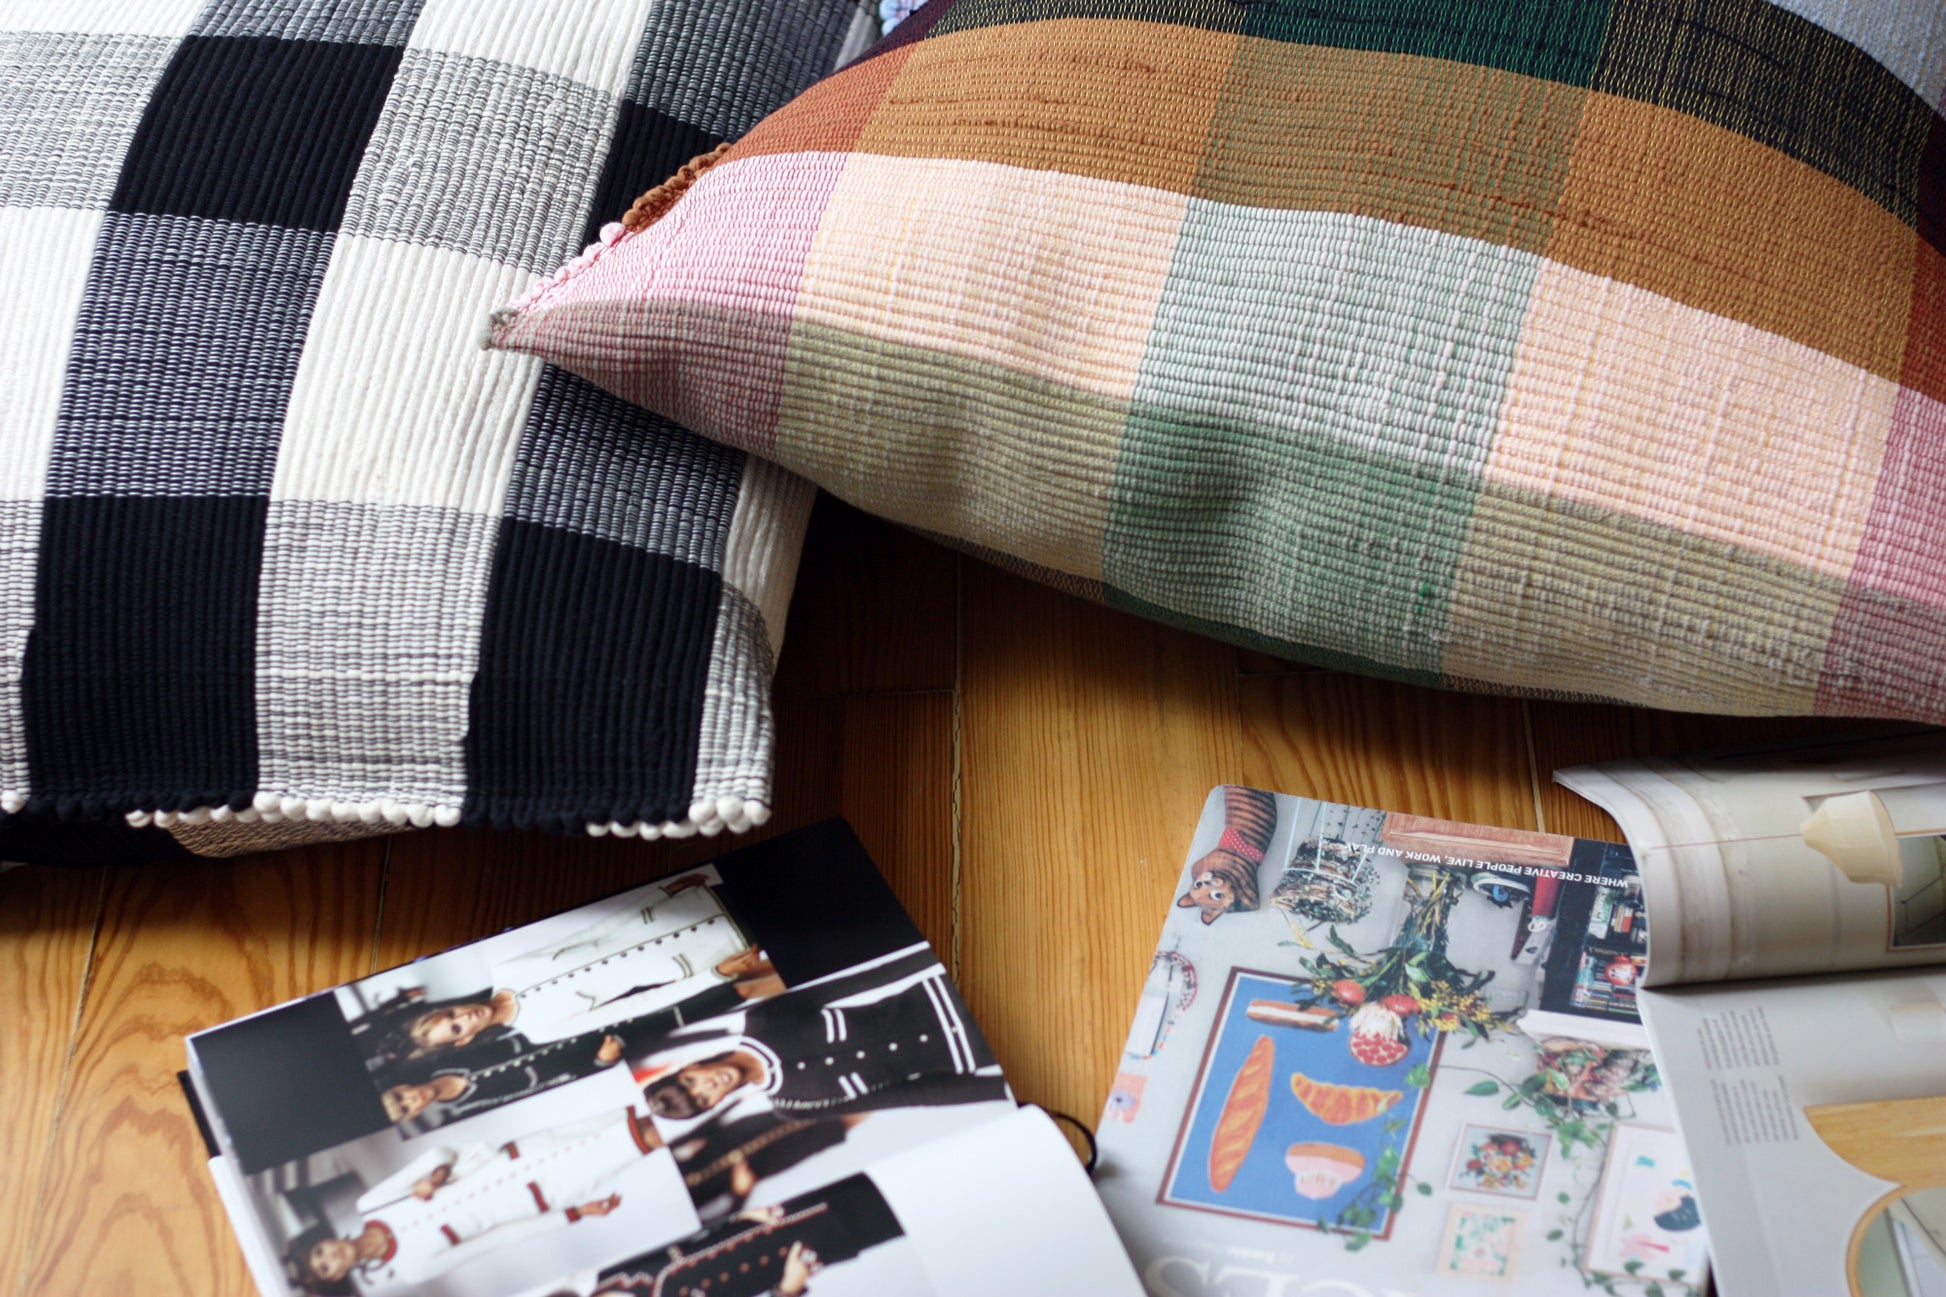 OVE handwoven pillow in checkered pattern by My Friend Paco